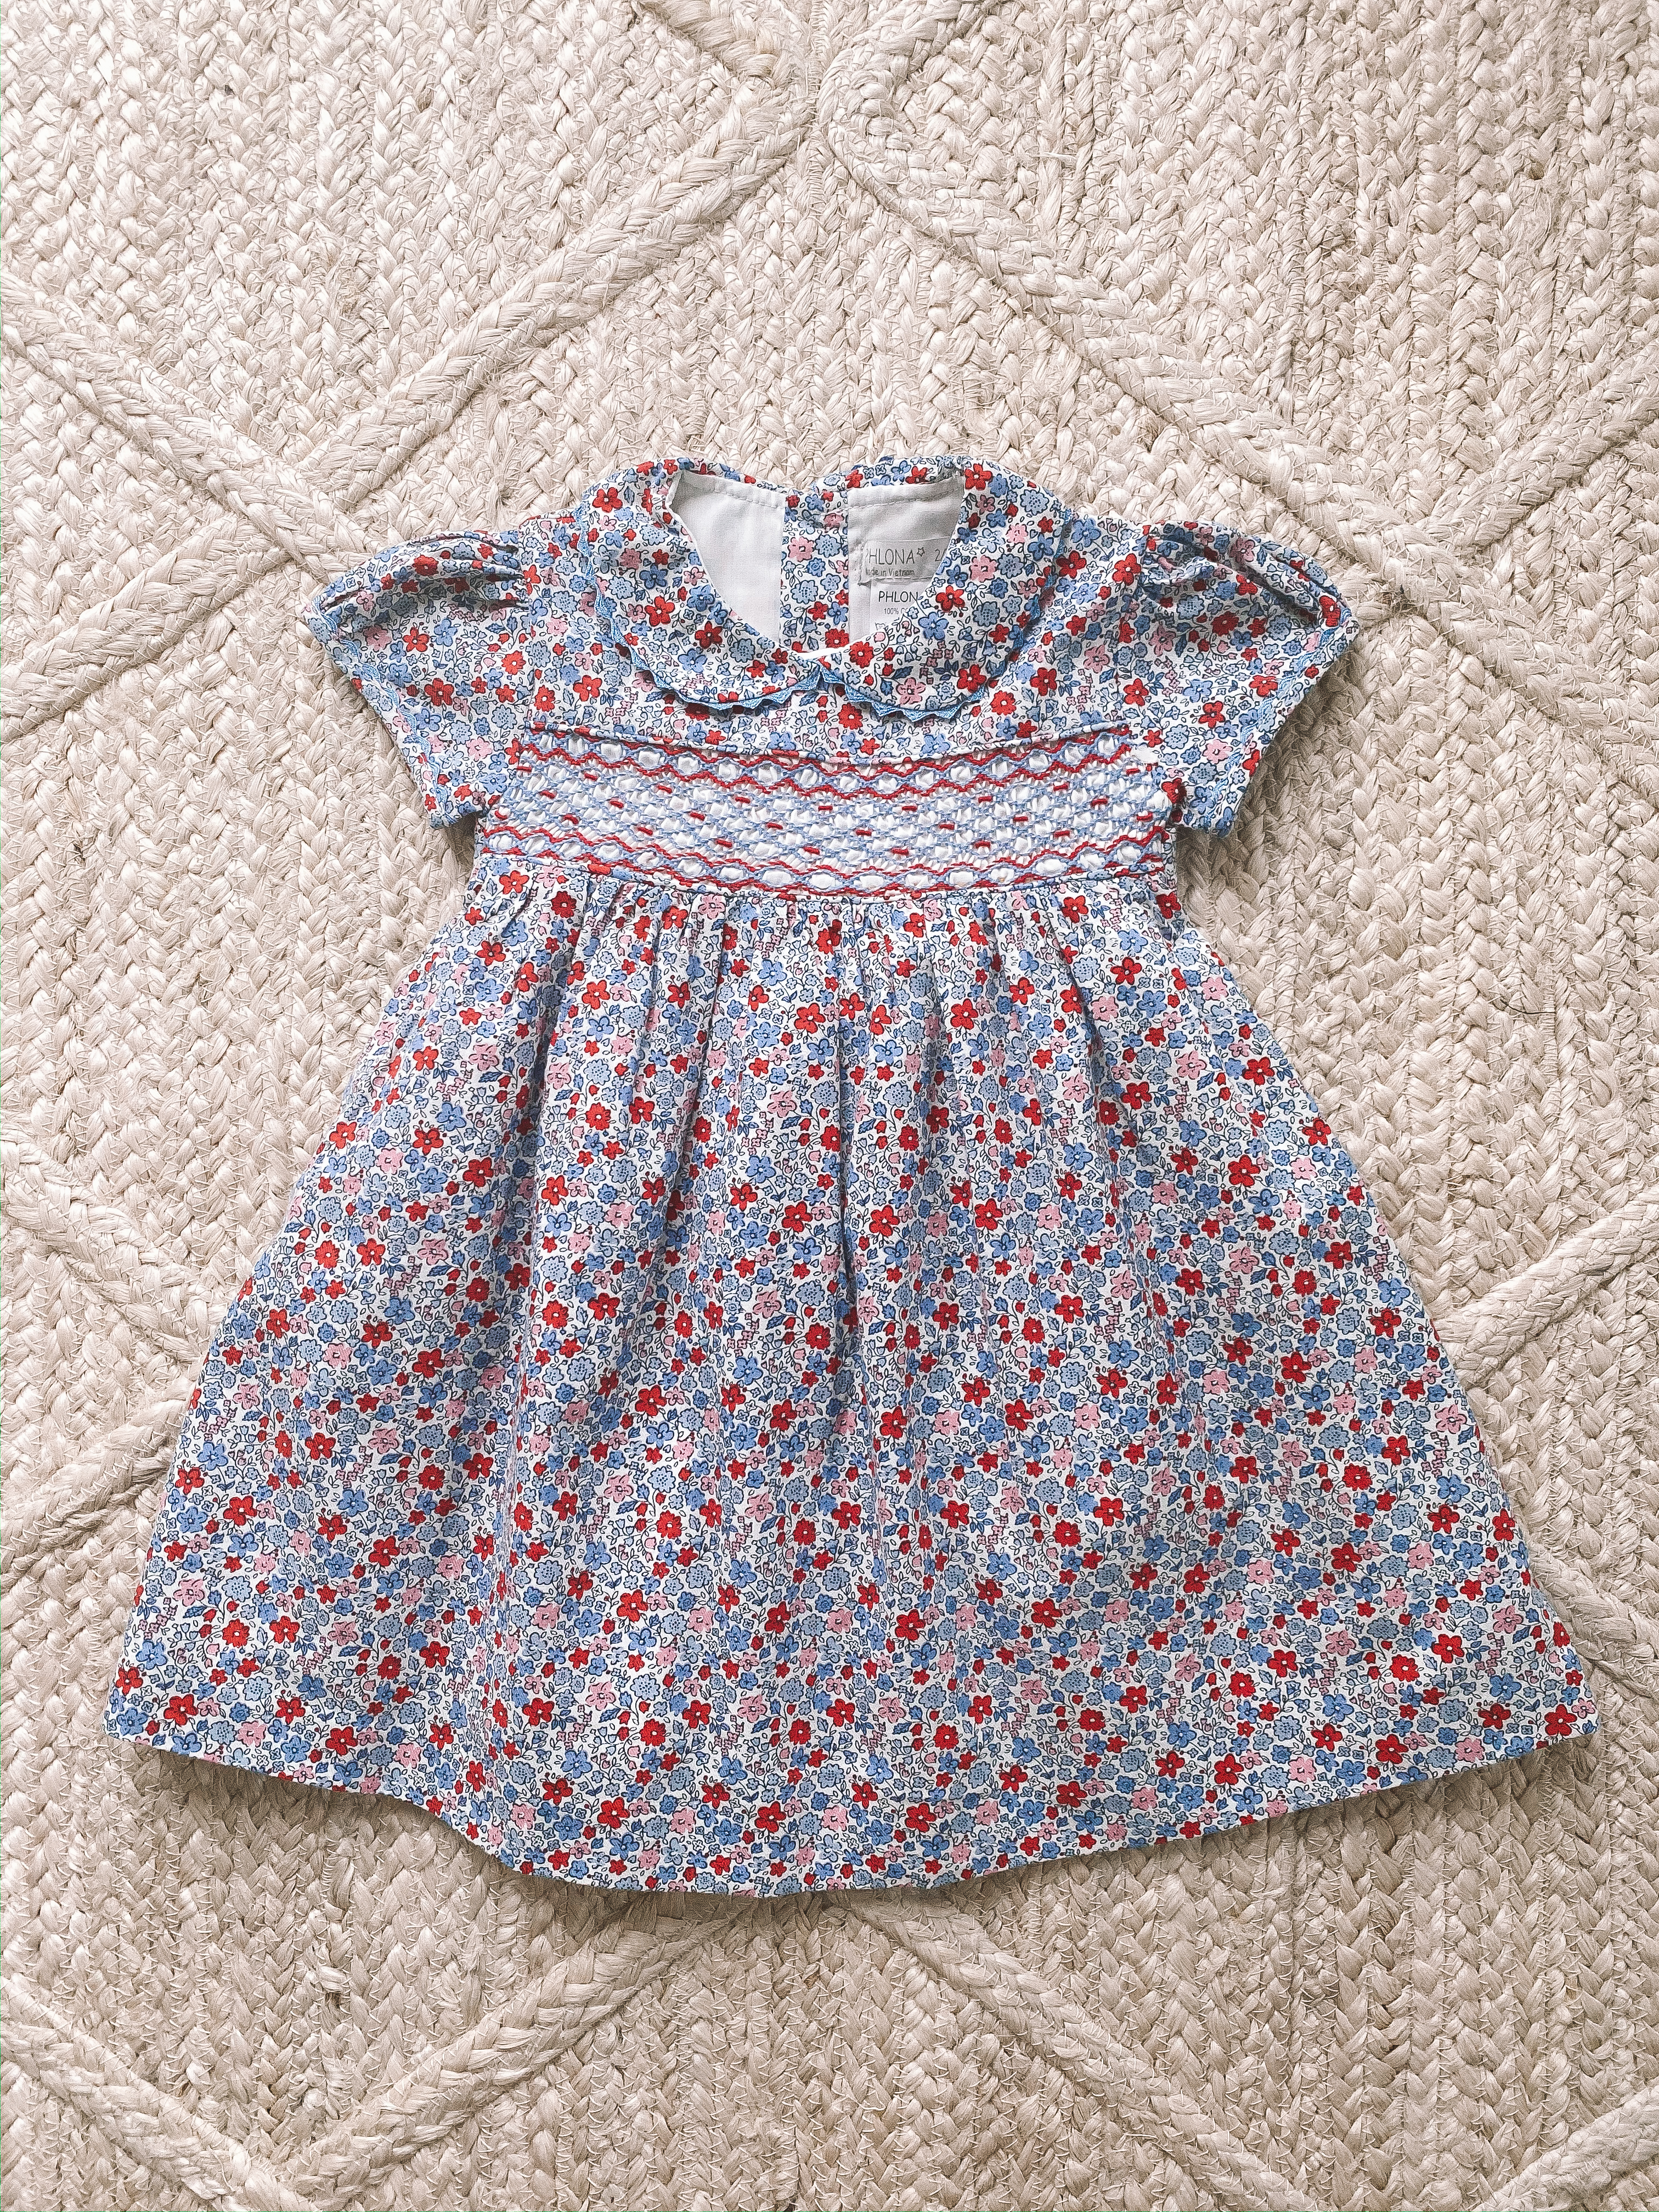 Smocked Baby + Girls' Dresses from